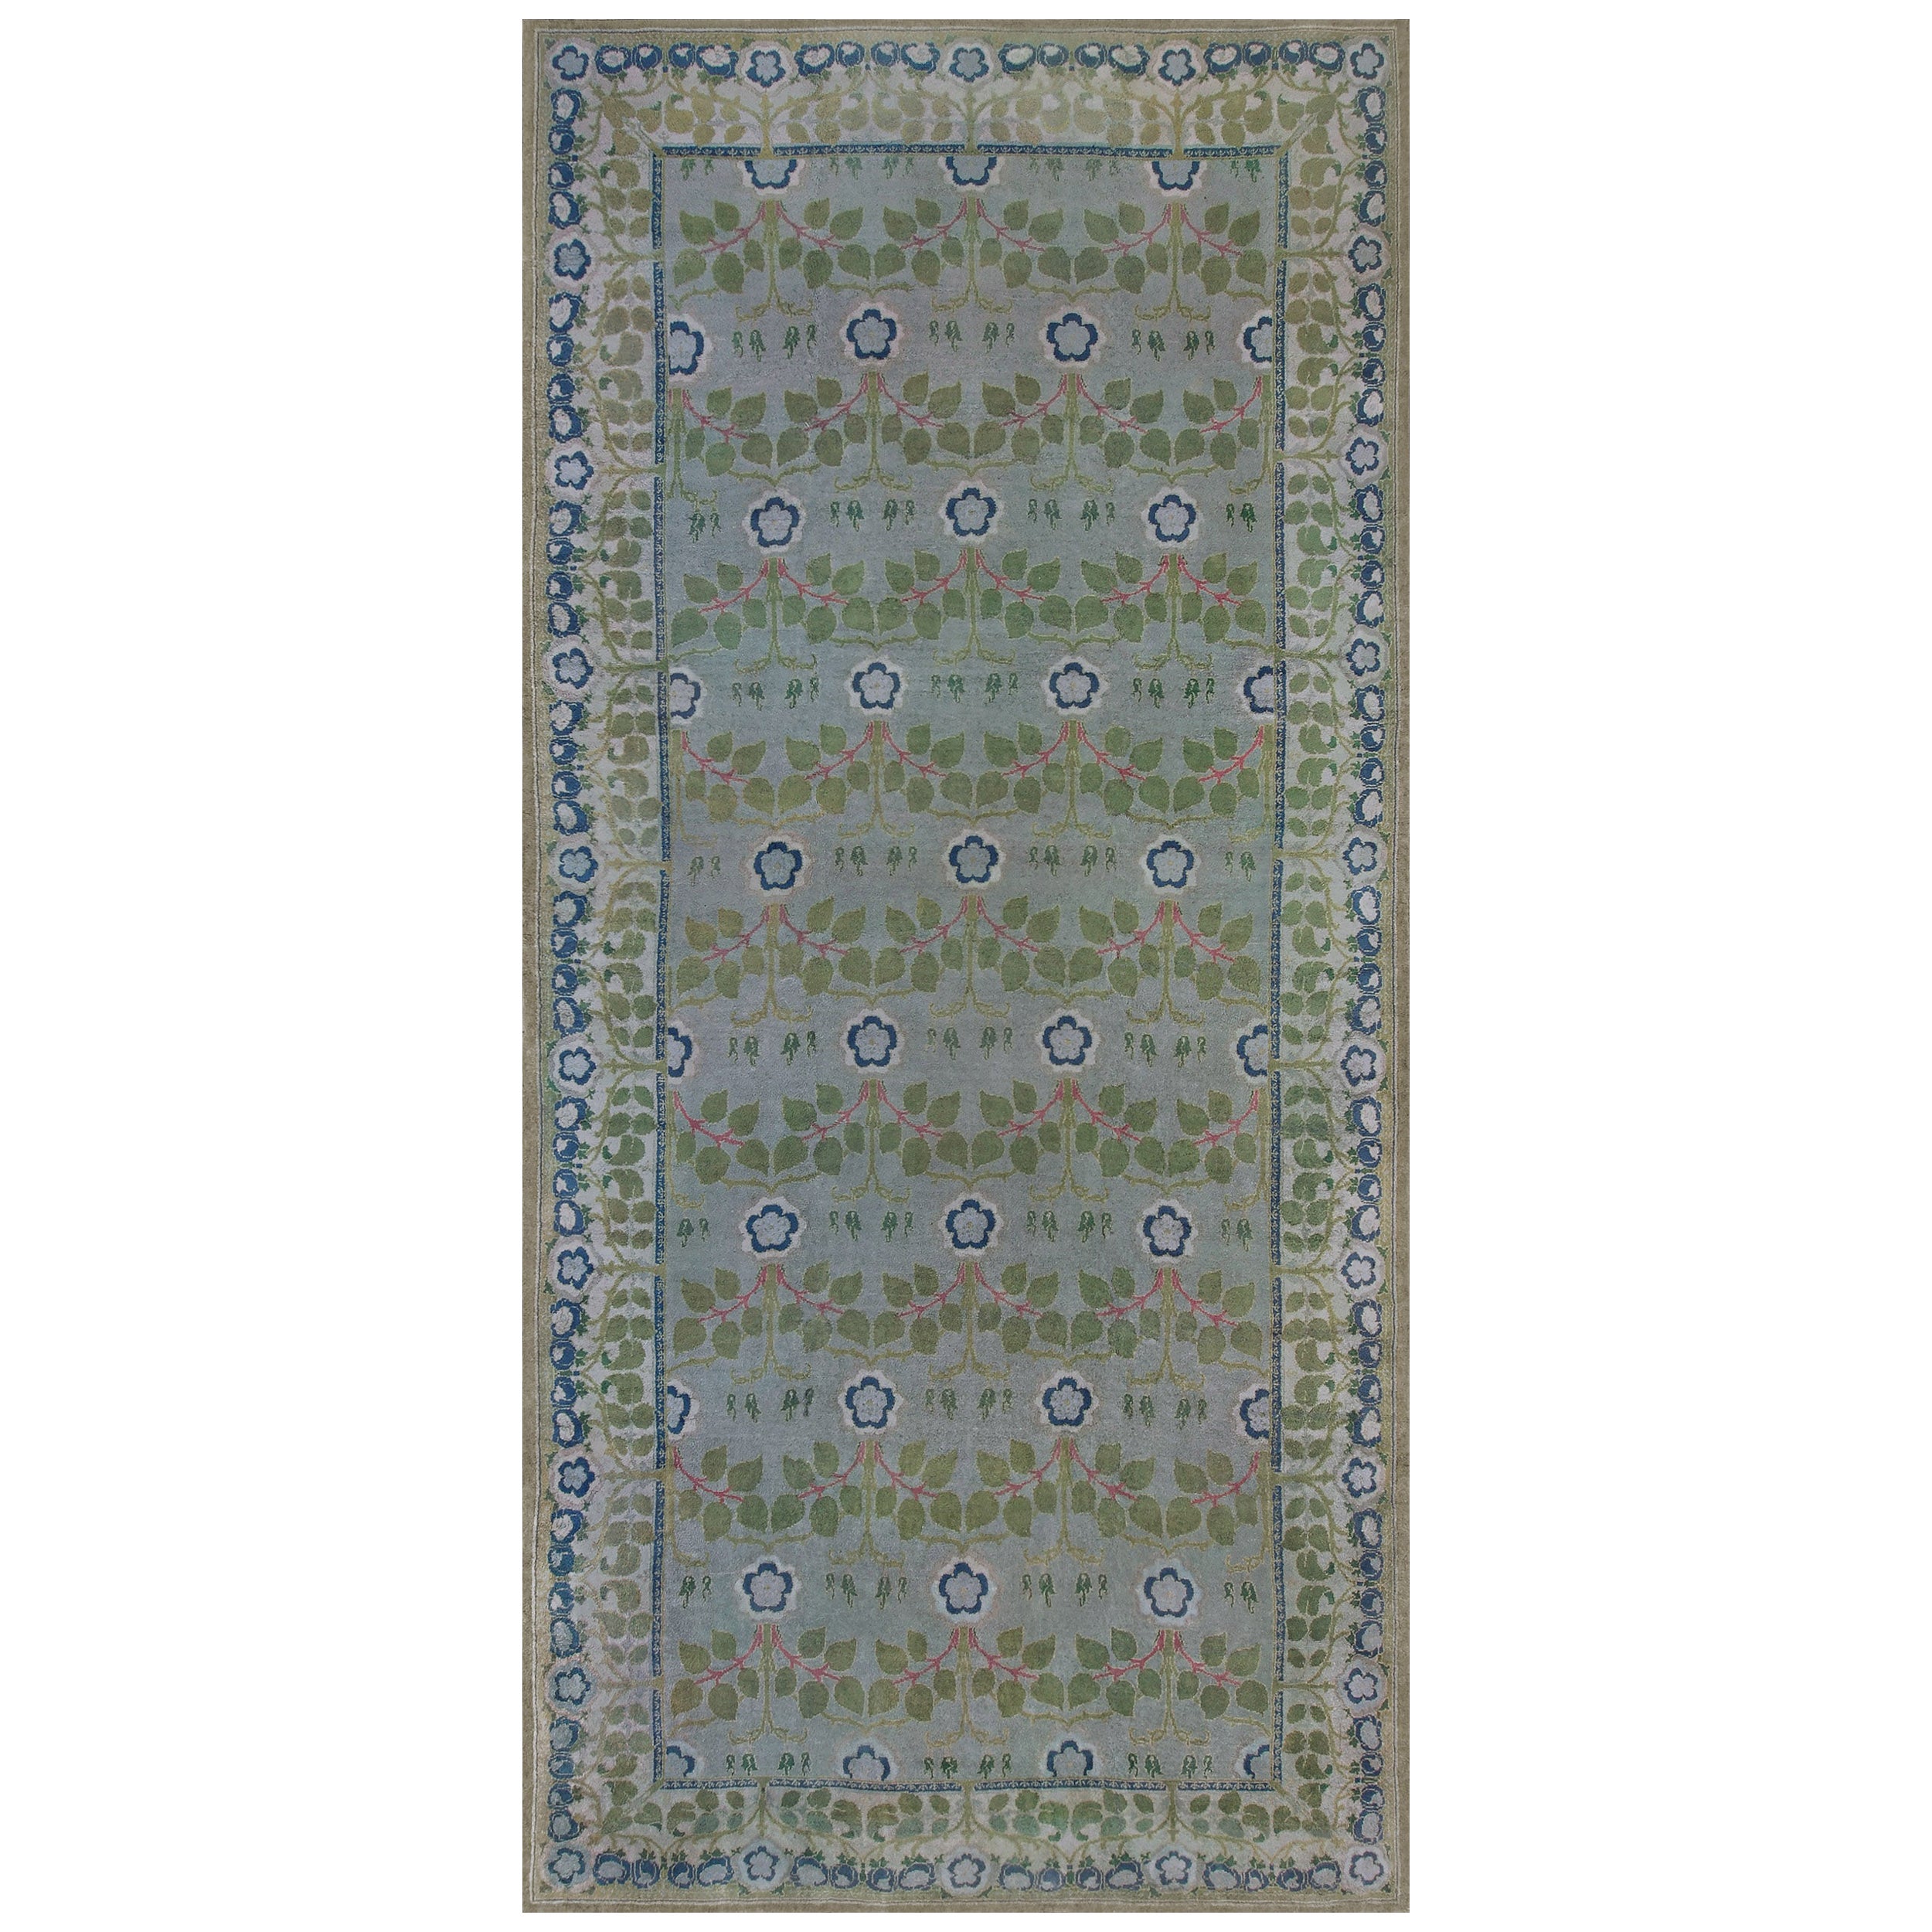 Large-Sized Antique Irish Donegal Rug For Sale